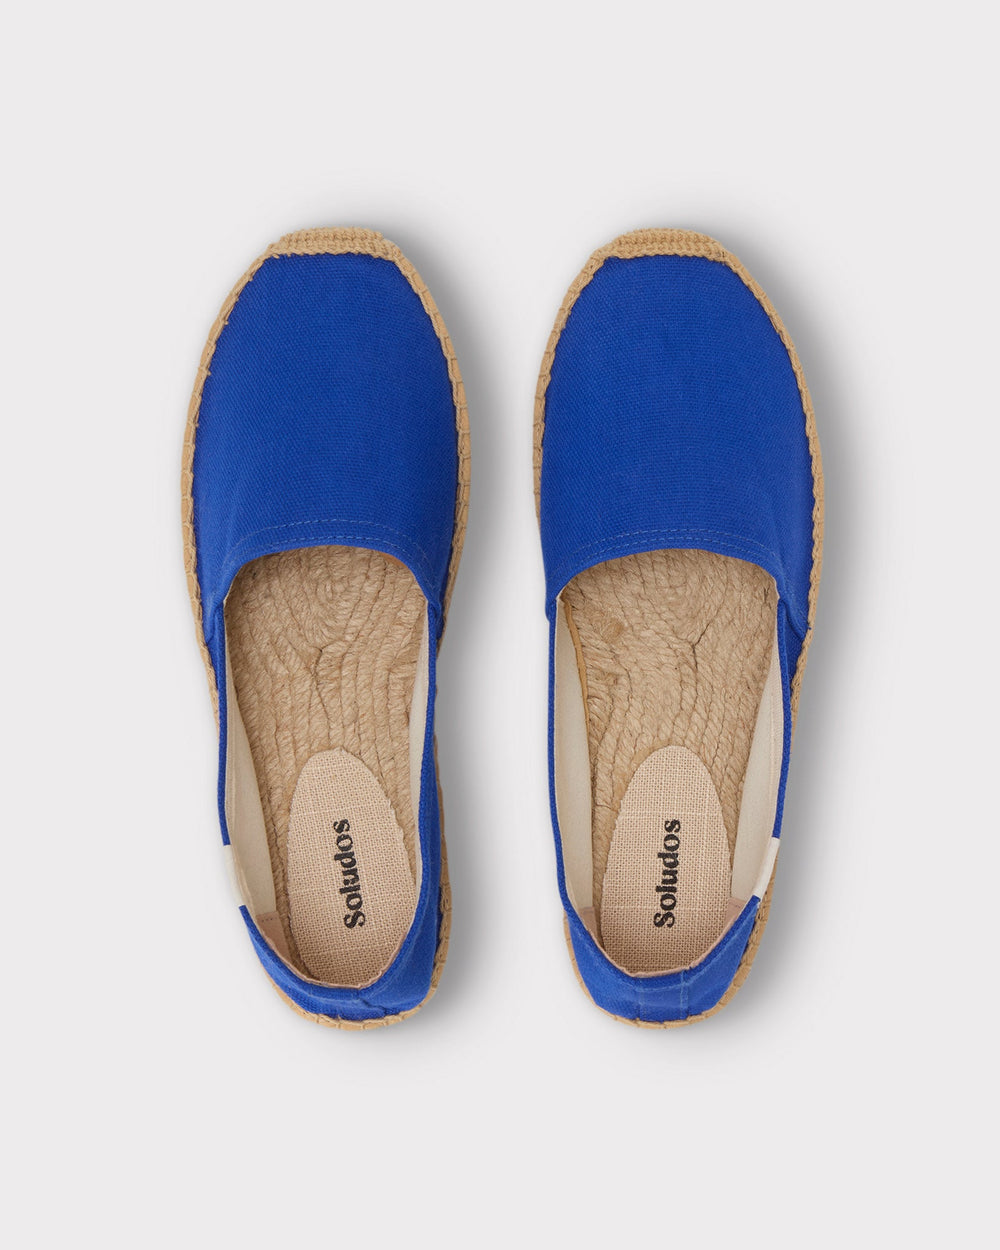 The Original Dali - Brights - French Blue - Women's - Women's Espadrilles - French Blue - Soludos -